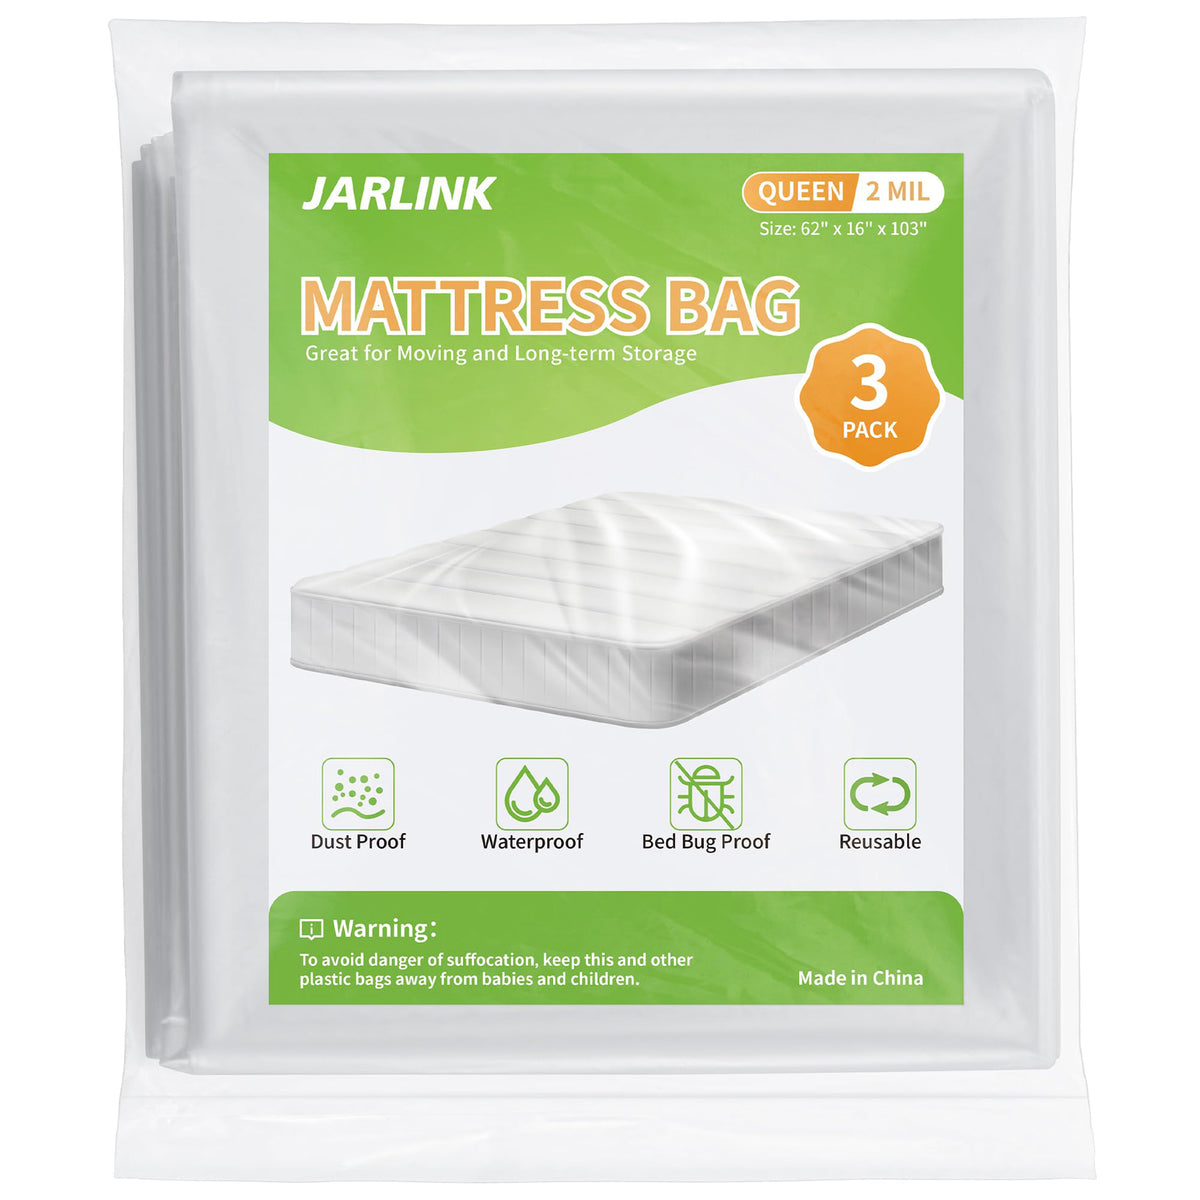 JARLINK 3PK Mattress Bags for Moving Storage, Queen Size, 2 Mil Waterproof Plastic Mattress Protector Fits up to 16" Thick Mattress, Heavy-Duty Reusable Mattress Cover for Moving and Storage